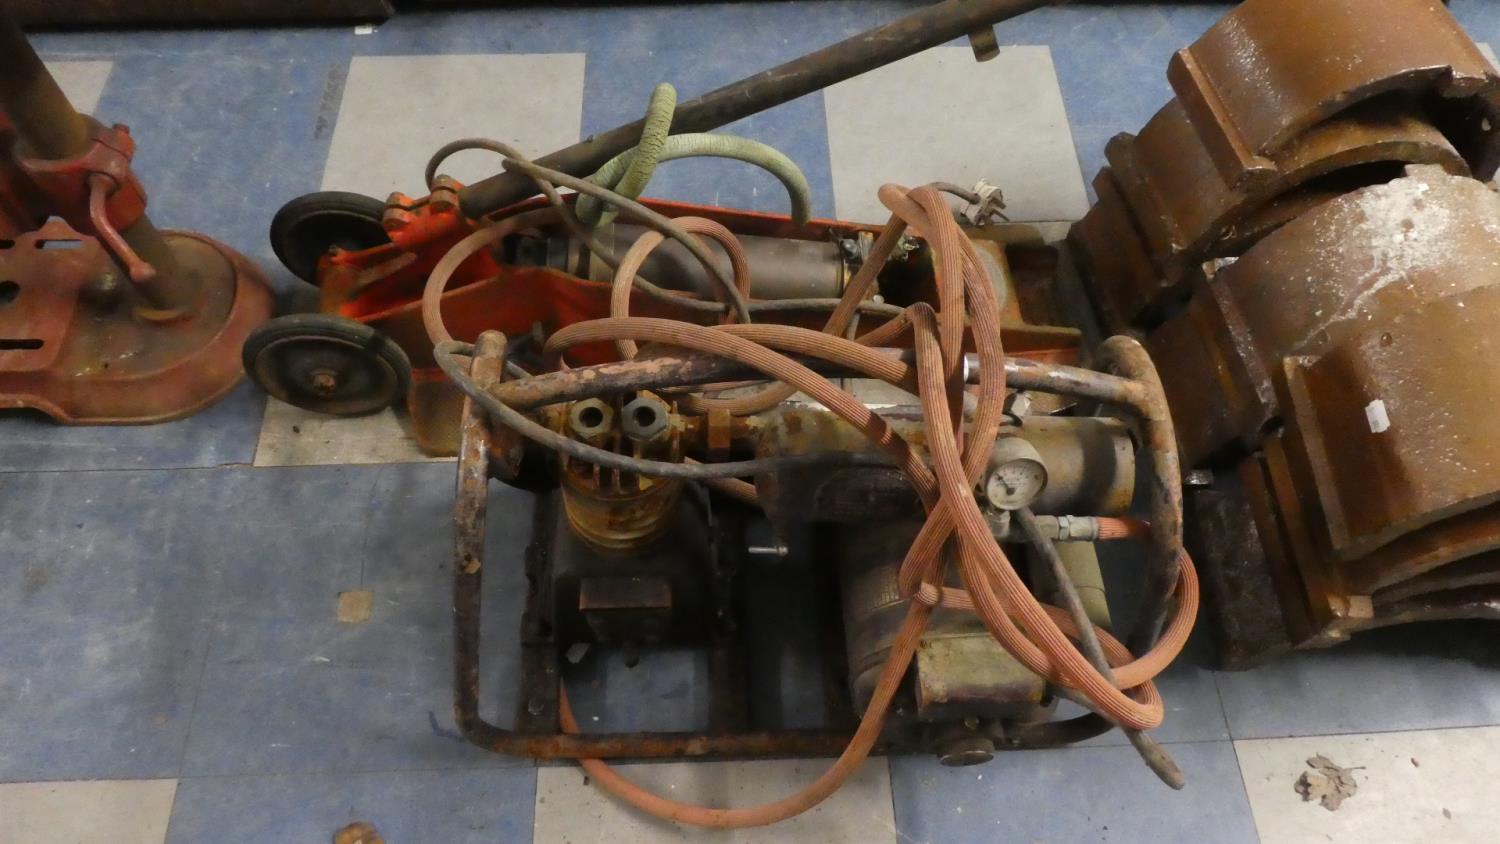 A Vintage Electrically Operated Compressor (Not Tested) Together with a Vintages Nismet-Trolley